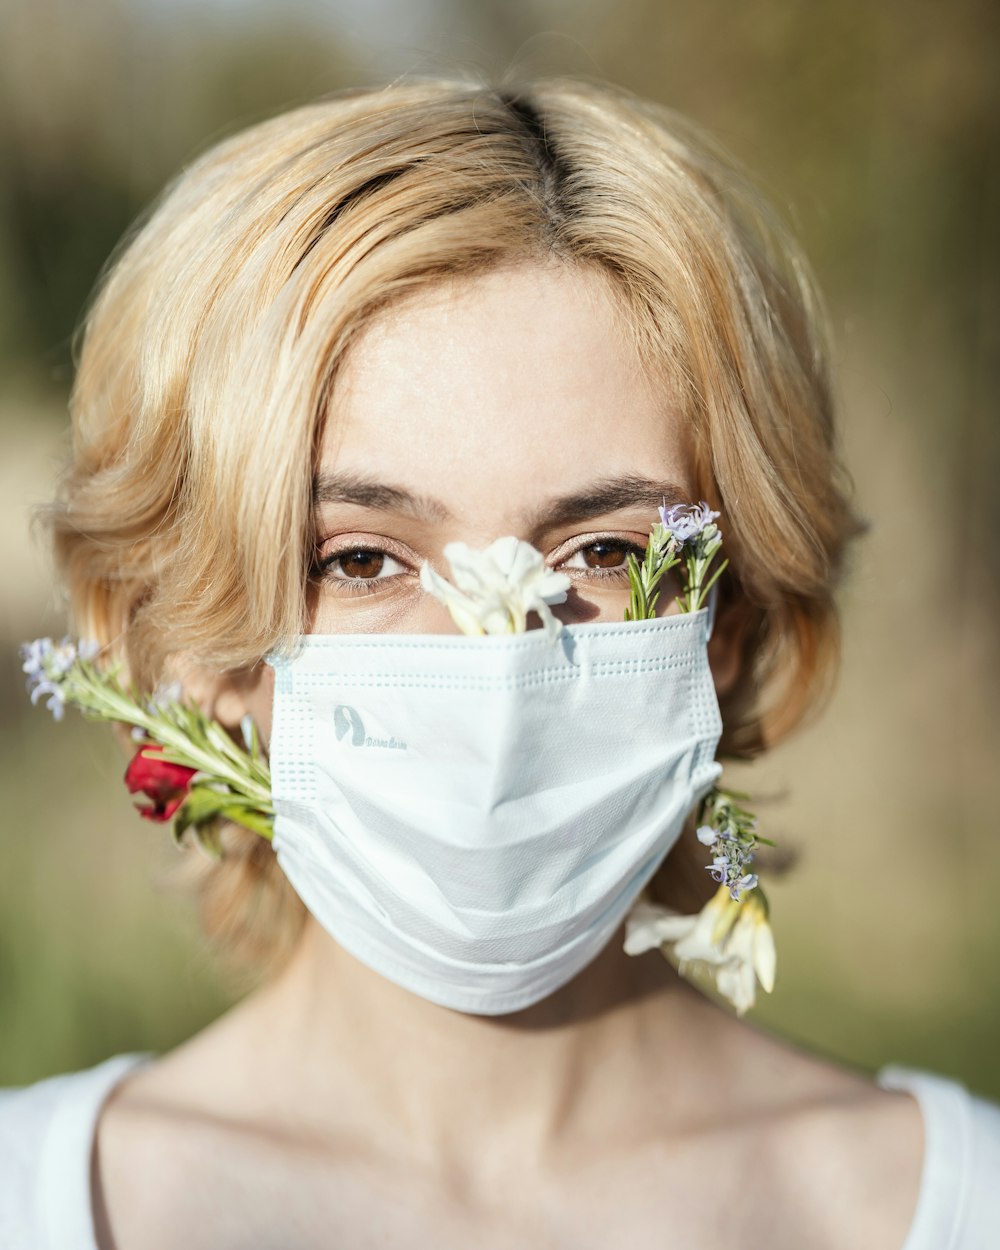 a woman wearing a face mask and flowers in her hair